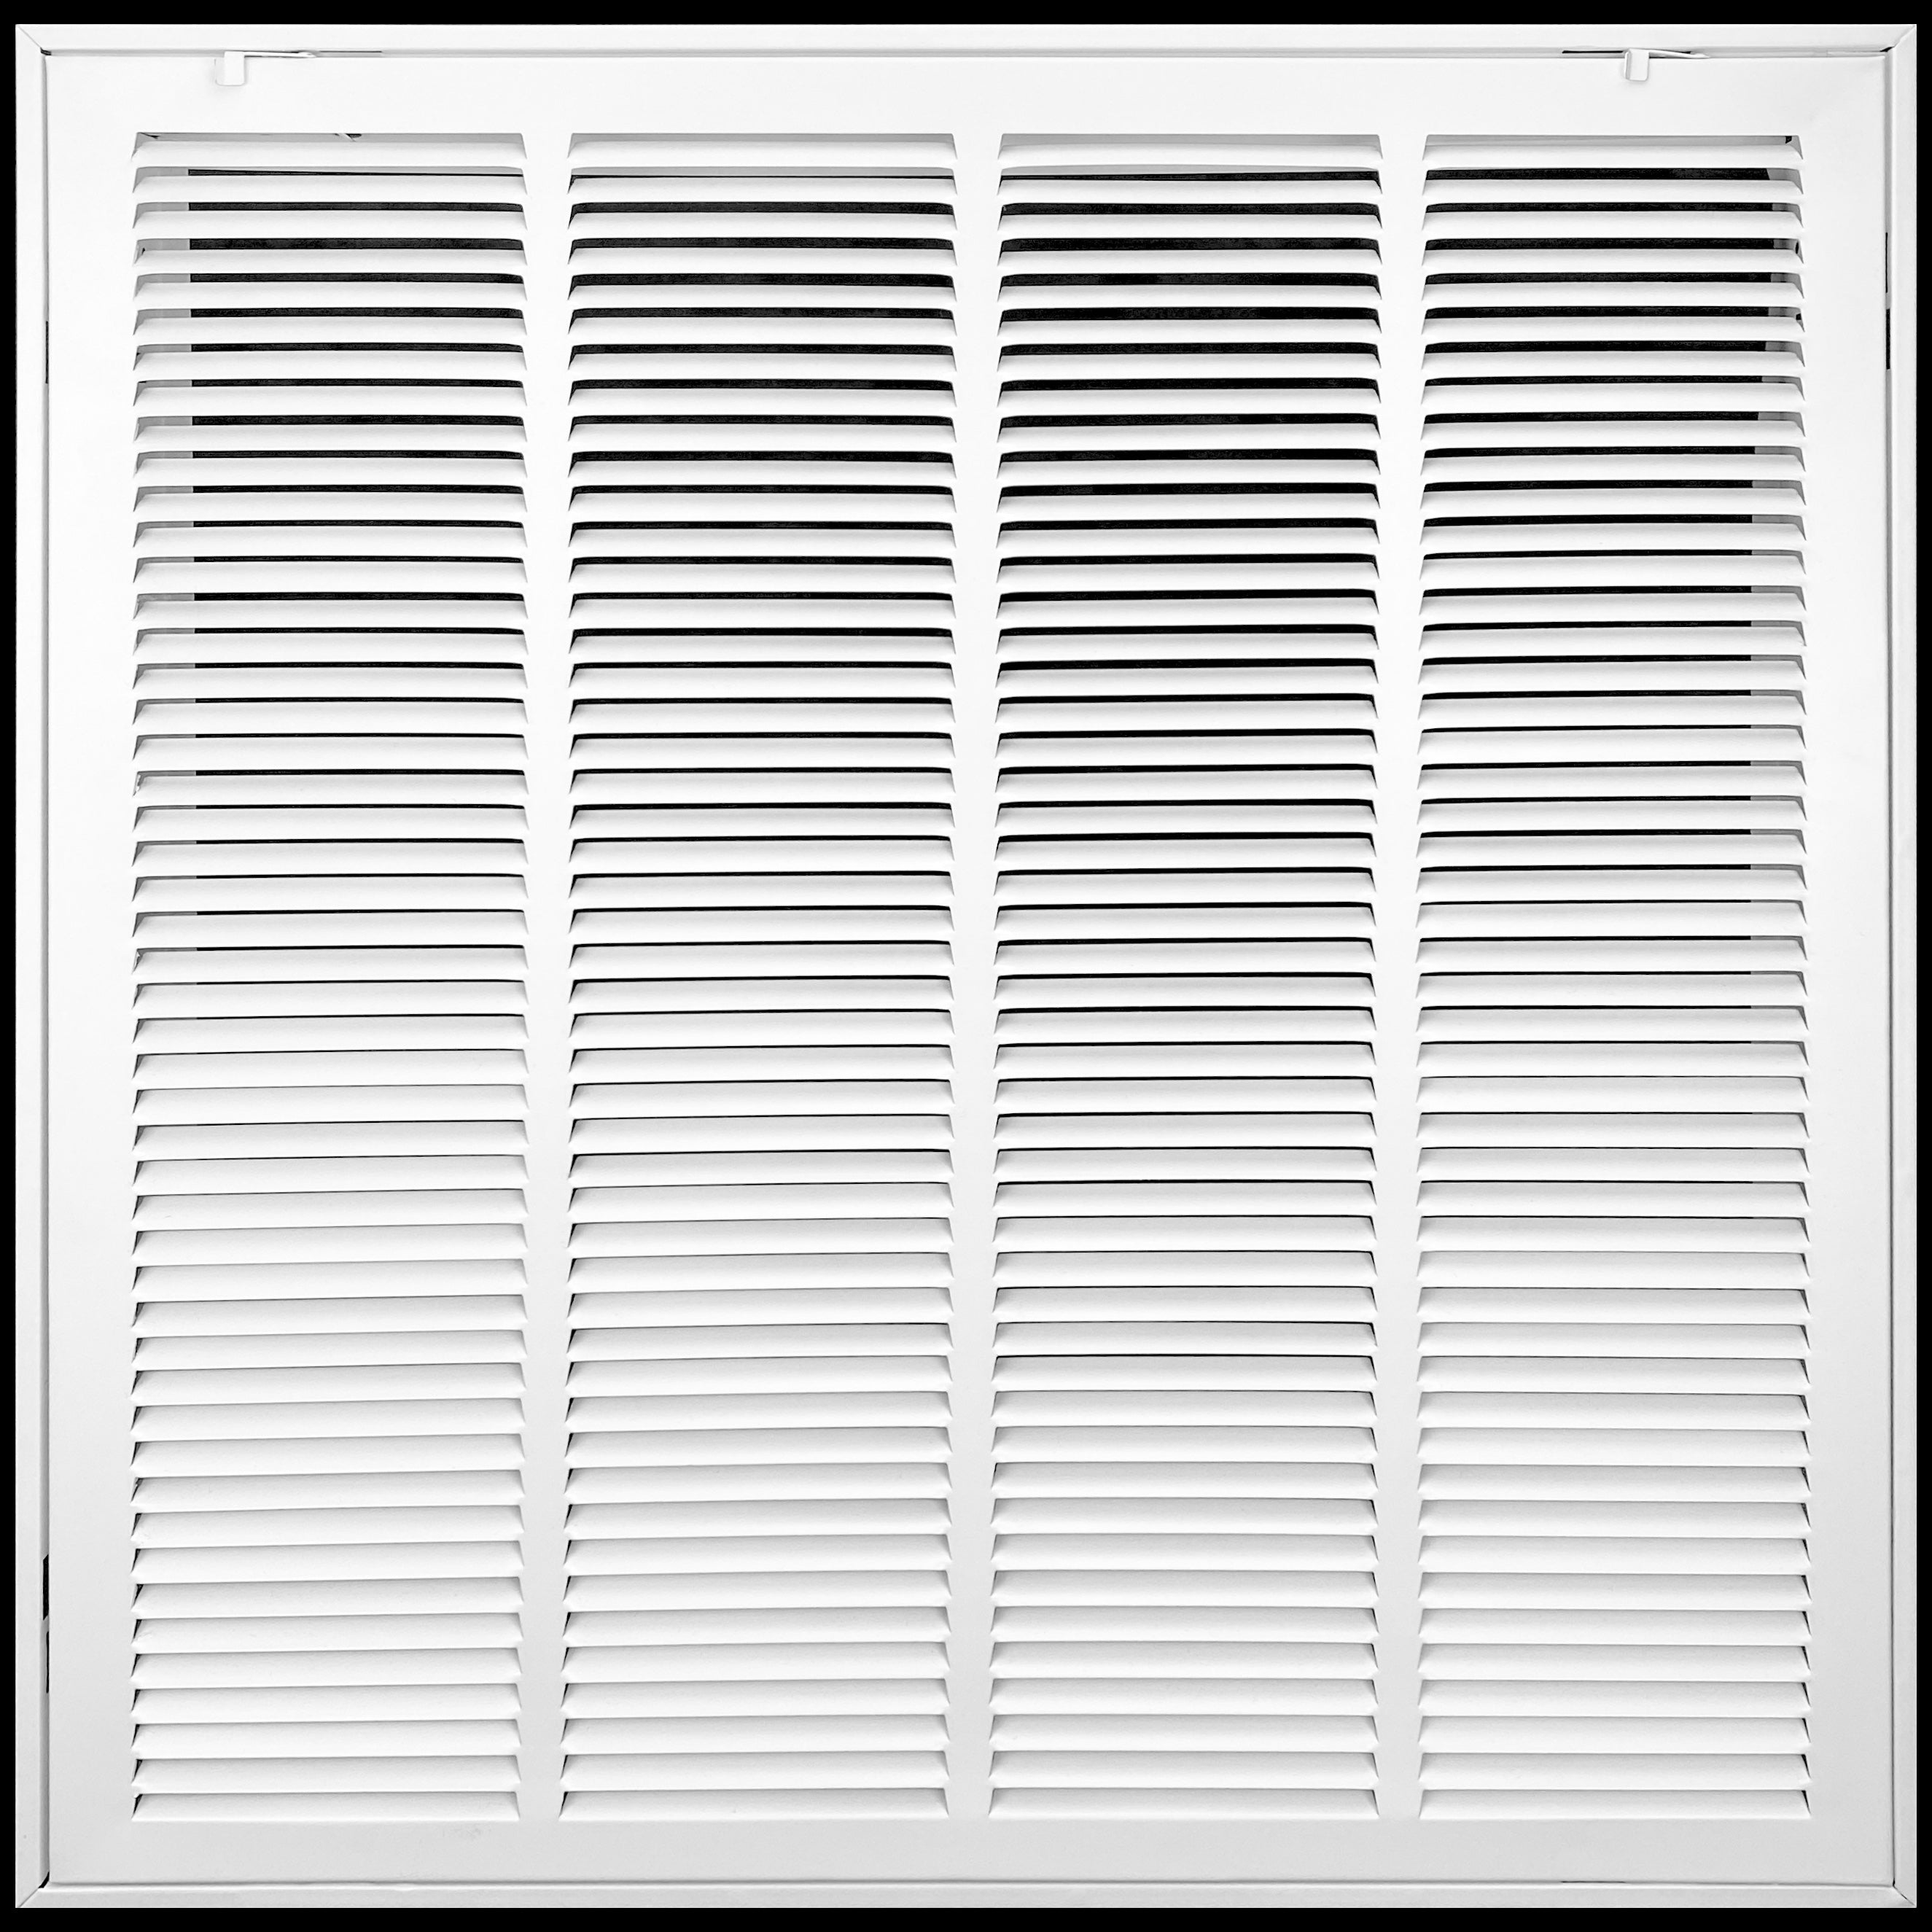 airgrilles 20" x 20" duct opening   hd steel return air filter grille for sidewall and ceiling 7hnd-rfg1-wh-20x20 038775638234 - 1